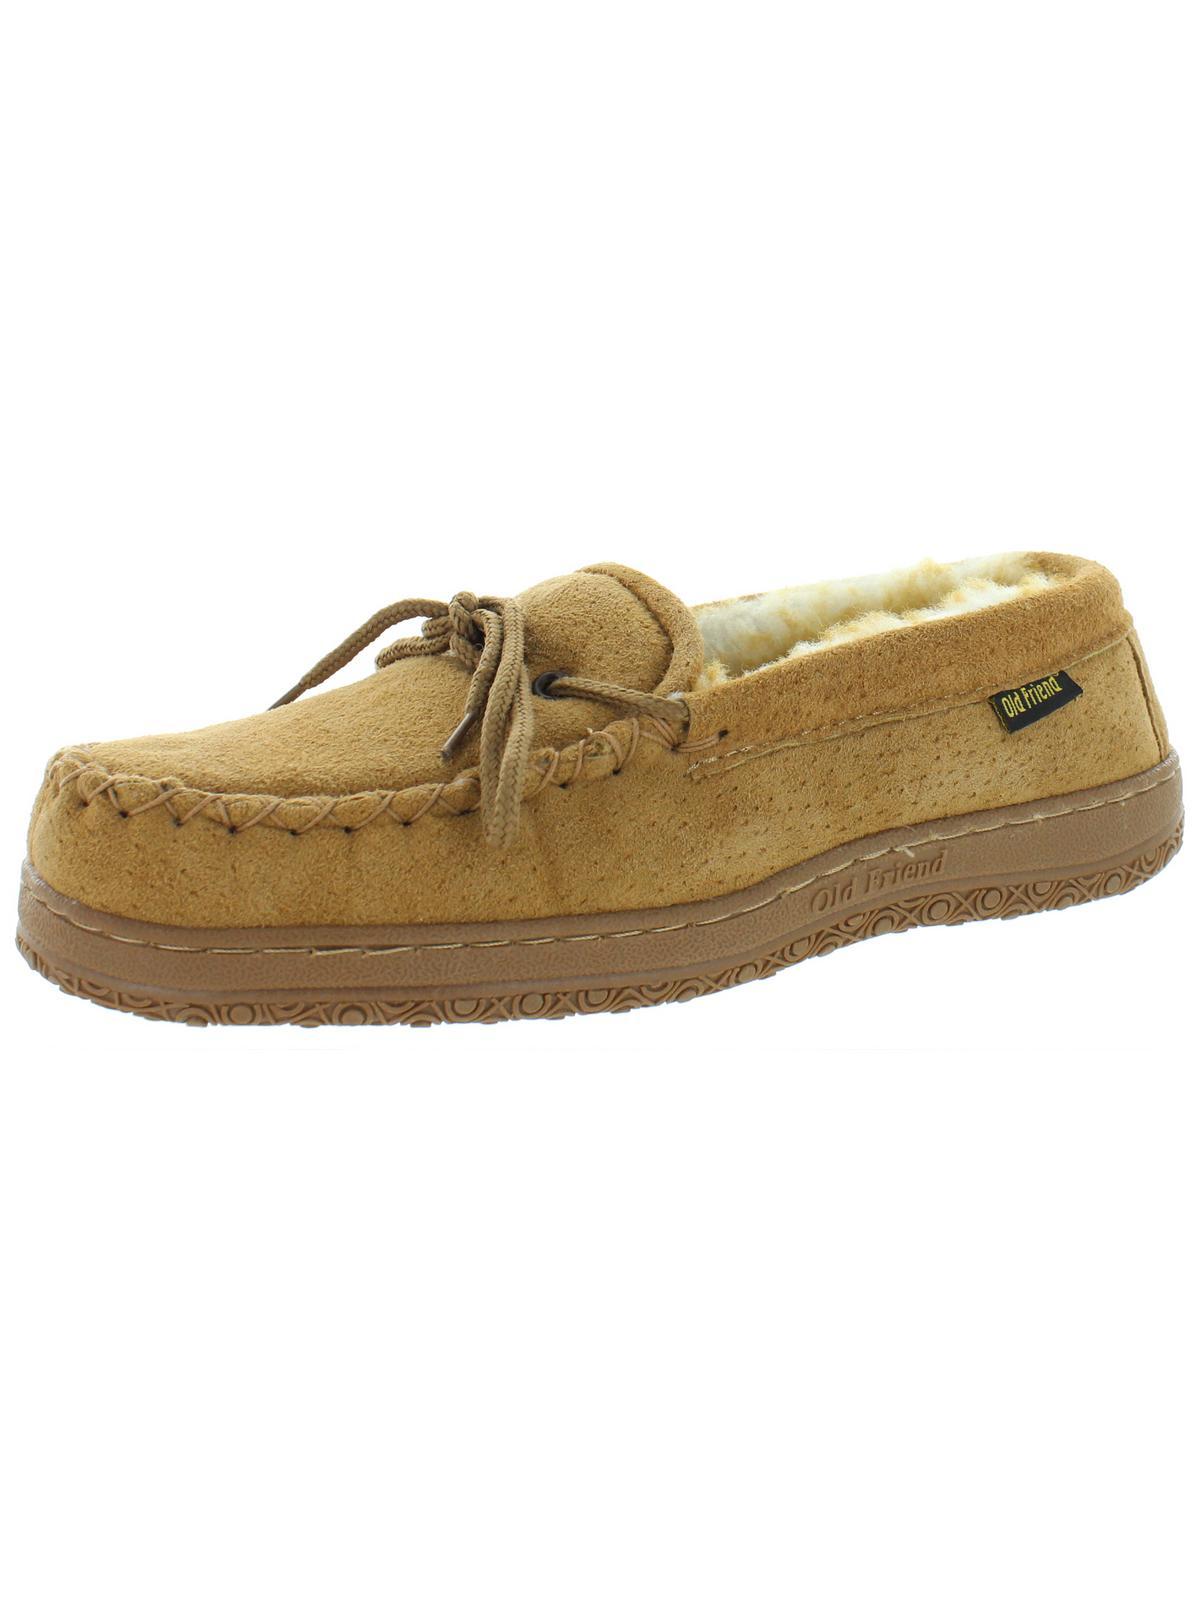 Old Friend Suede Sheepskin Lined Moccasins in Natural for Men | Lyst